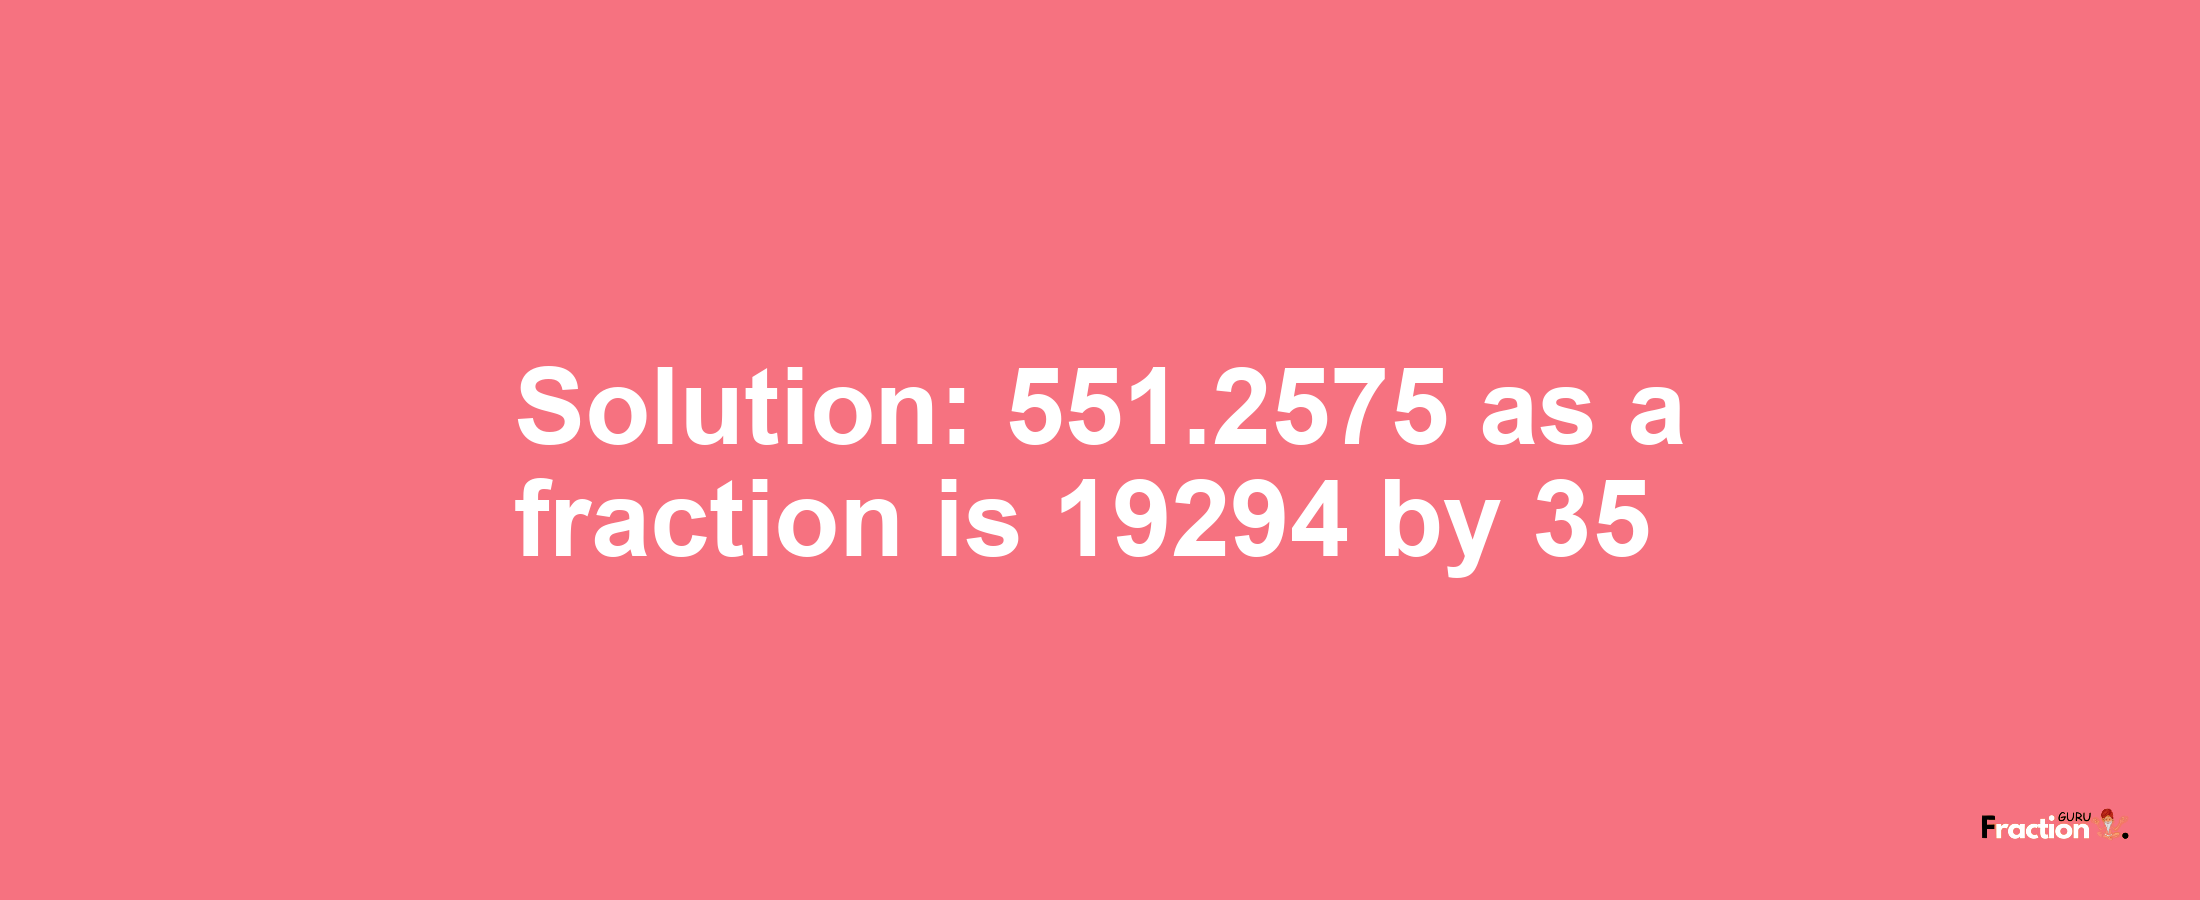 Solution:551.2575 as a fraction is 19294/35